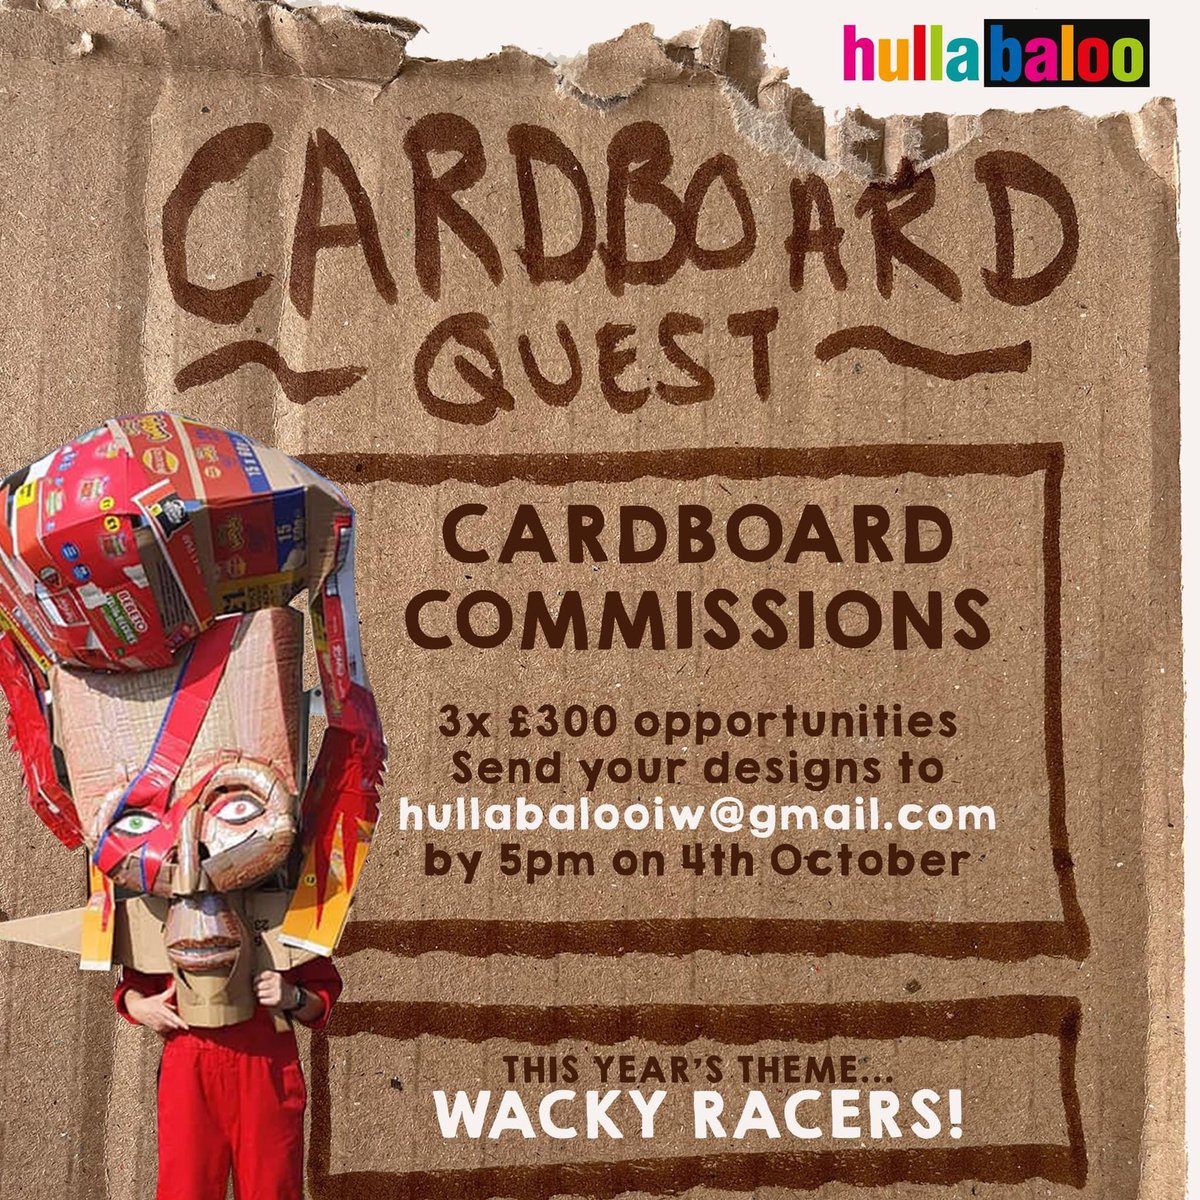 📦 📦 3 cardboard commission opportunities for £300 each. - It has to be a large scale vehicle (Wacky Racer). - You or someone you have organised has to operate it in the race at Hullabaloo on Sunday 16th October, 2pm. Entries to hullabalooiw@gmail.com by 5pm on 4th October.